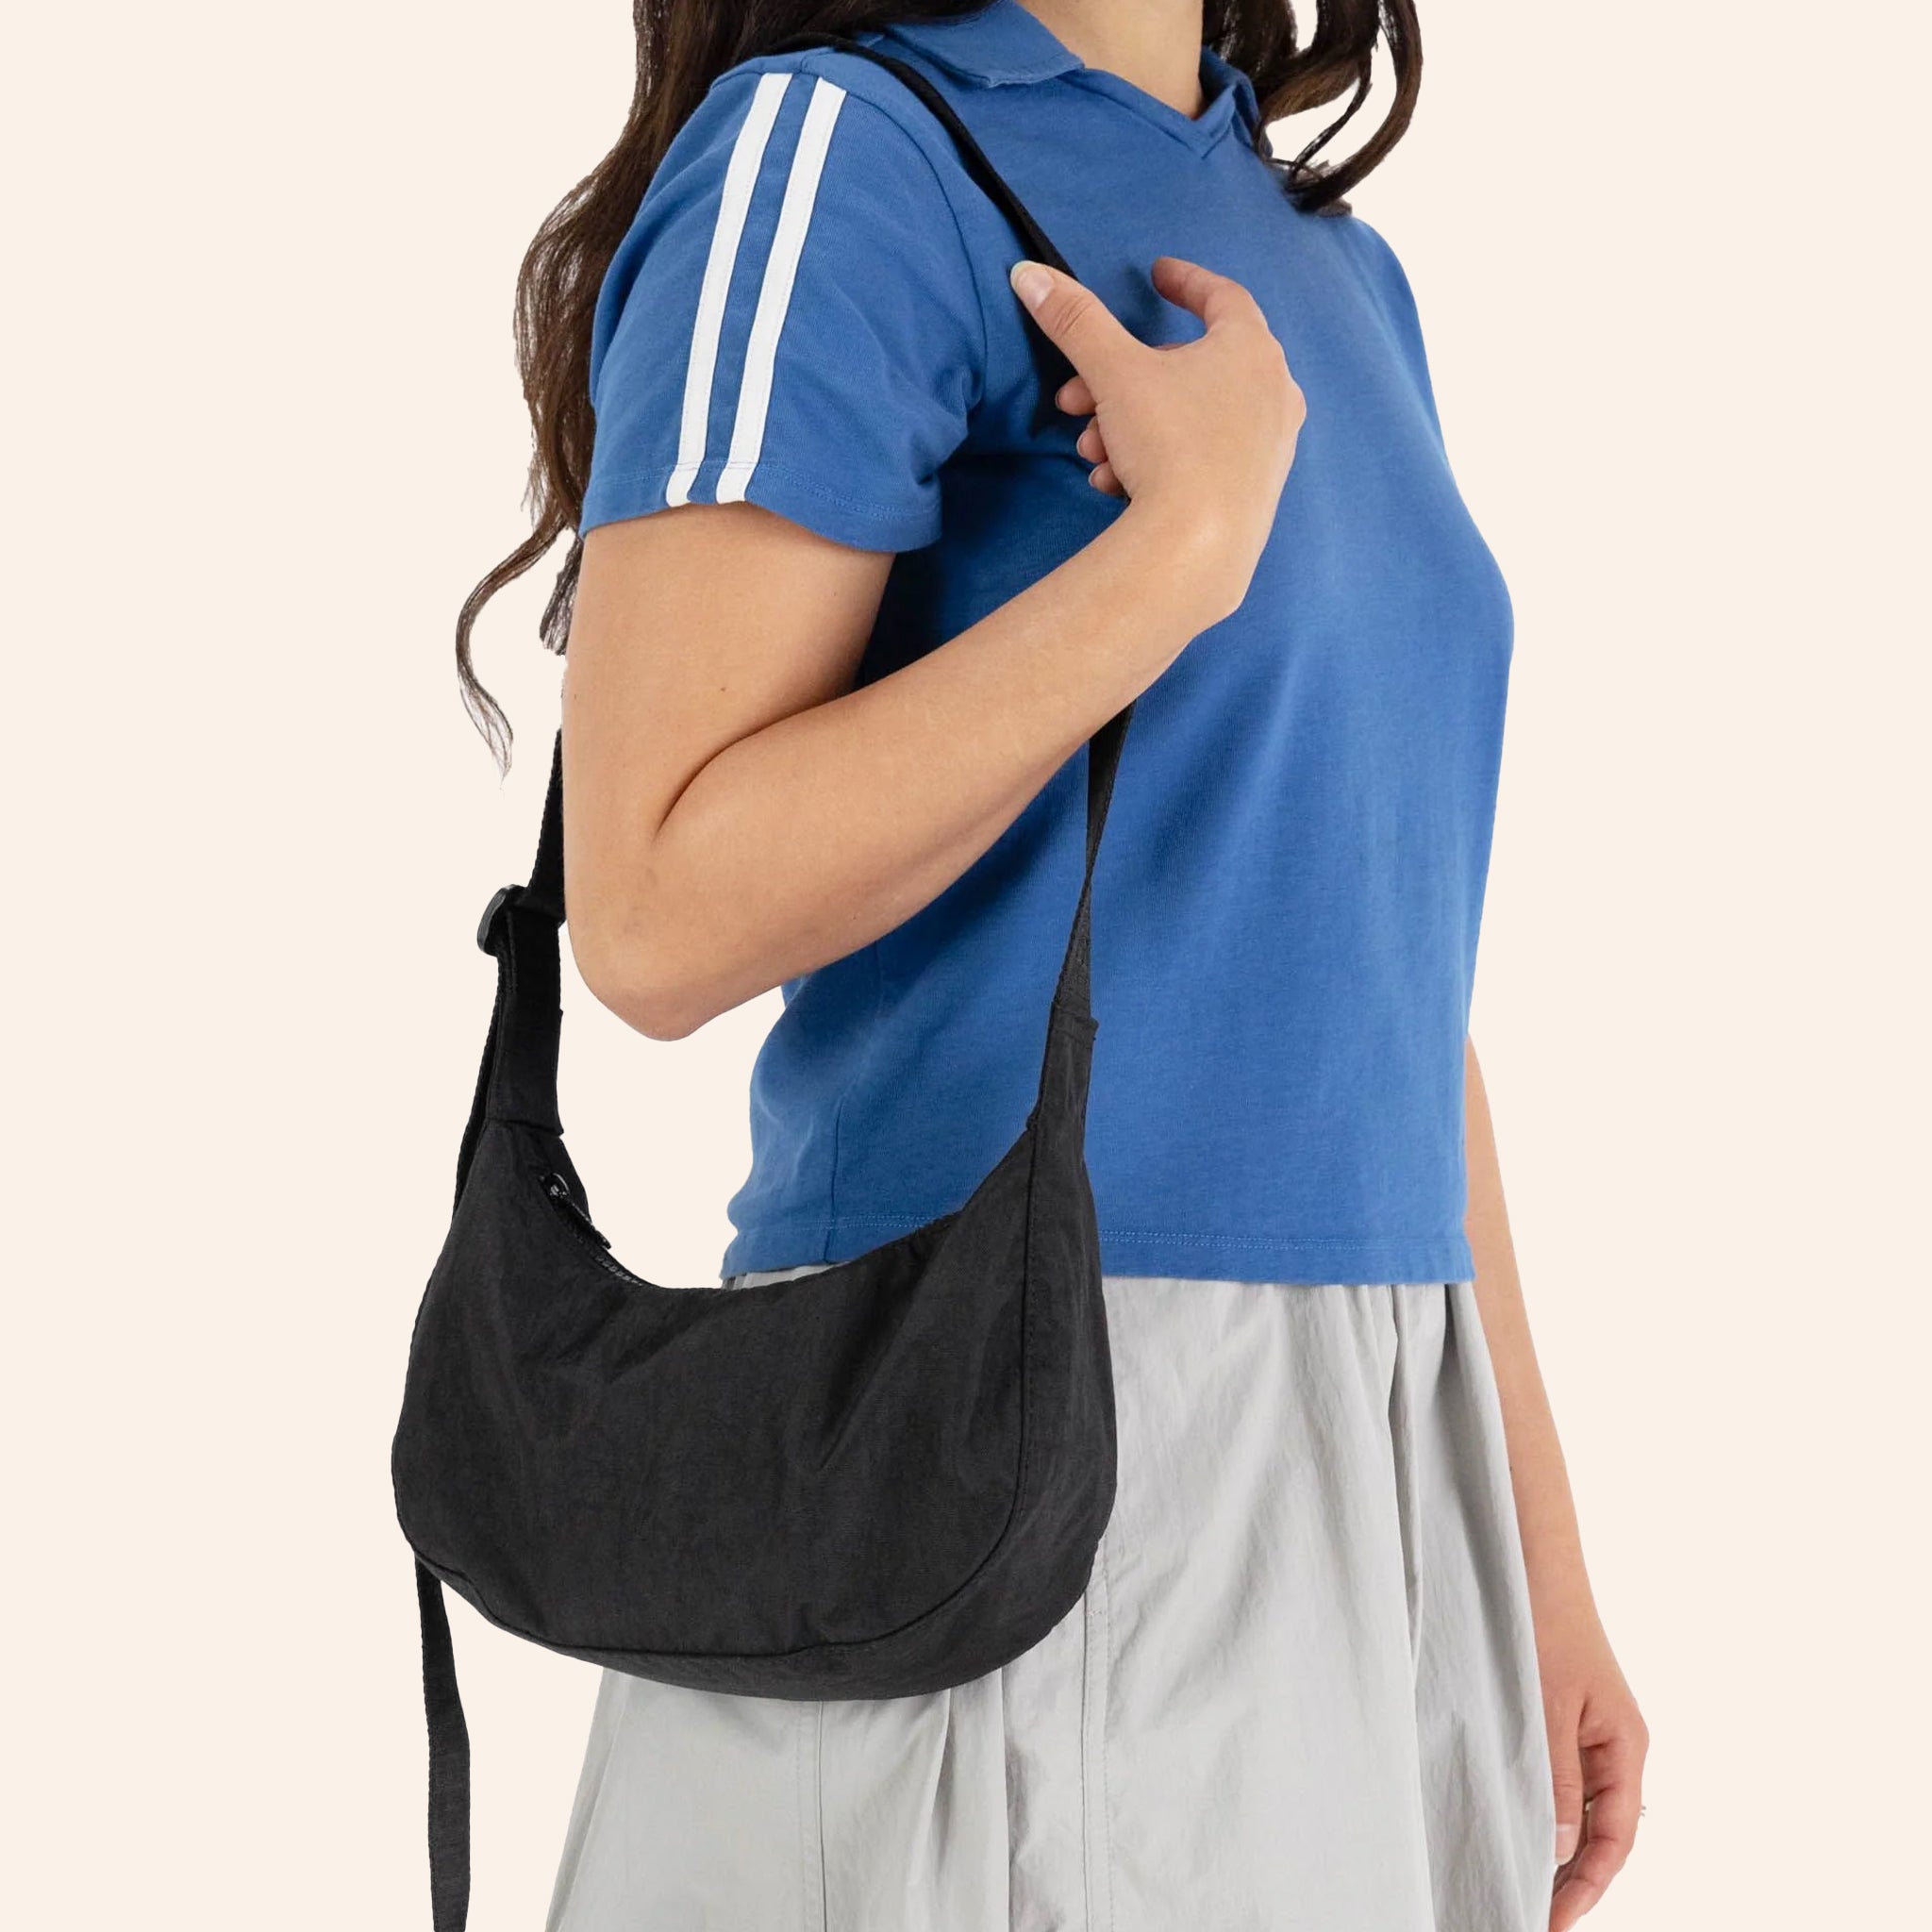 A small crescent shaped nylon shoulder bag with an adjustable strap to make it crossbody.